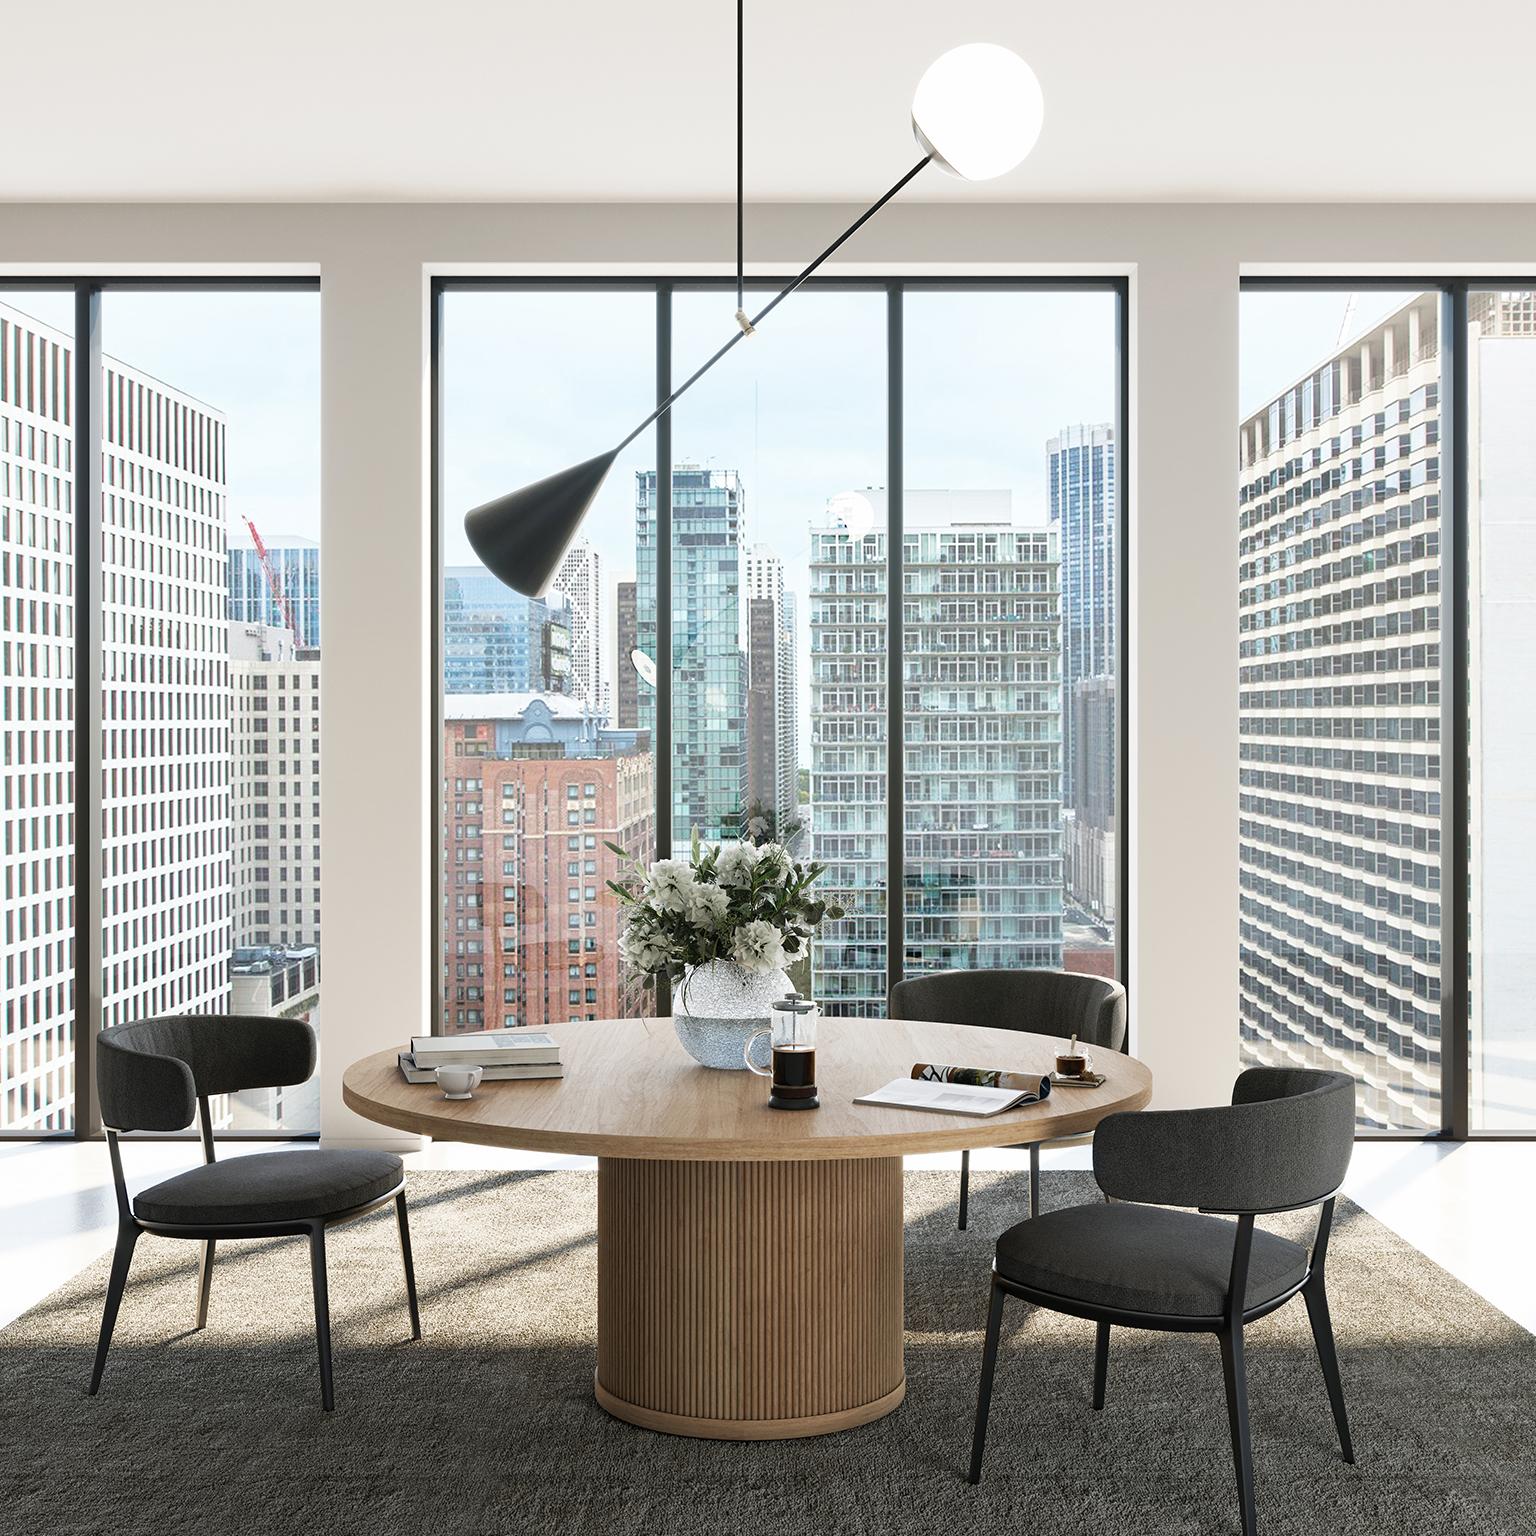 The Radius meeting table is a signature wood table that anchors a meeting room with purpose. Seating in a circle puts everyone in clear view, fostering participation and conversation. Granted, the tabletop could be cut as a square or oval, but we’re